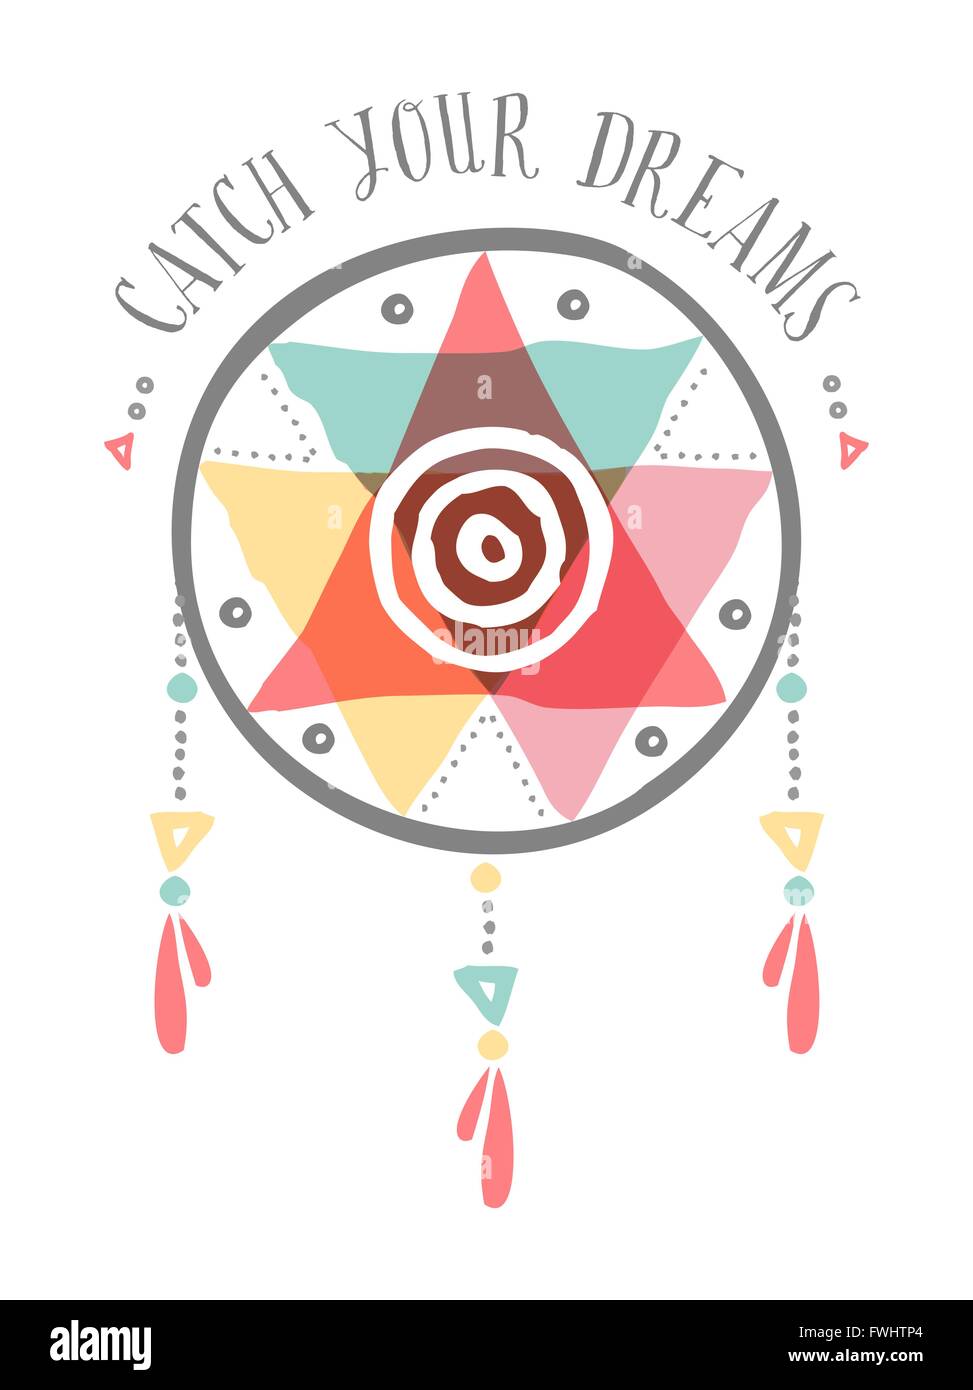 Catch your dreams boho illustration, tribal native american dreamcatcher with colorful shapes and spiritual elements. Stock Vector